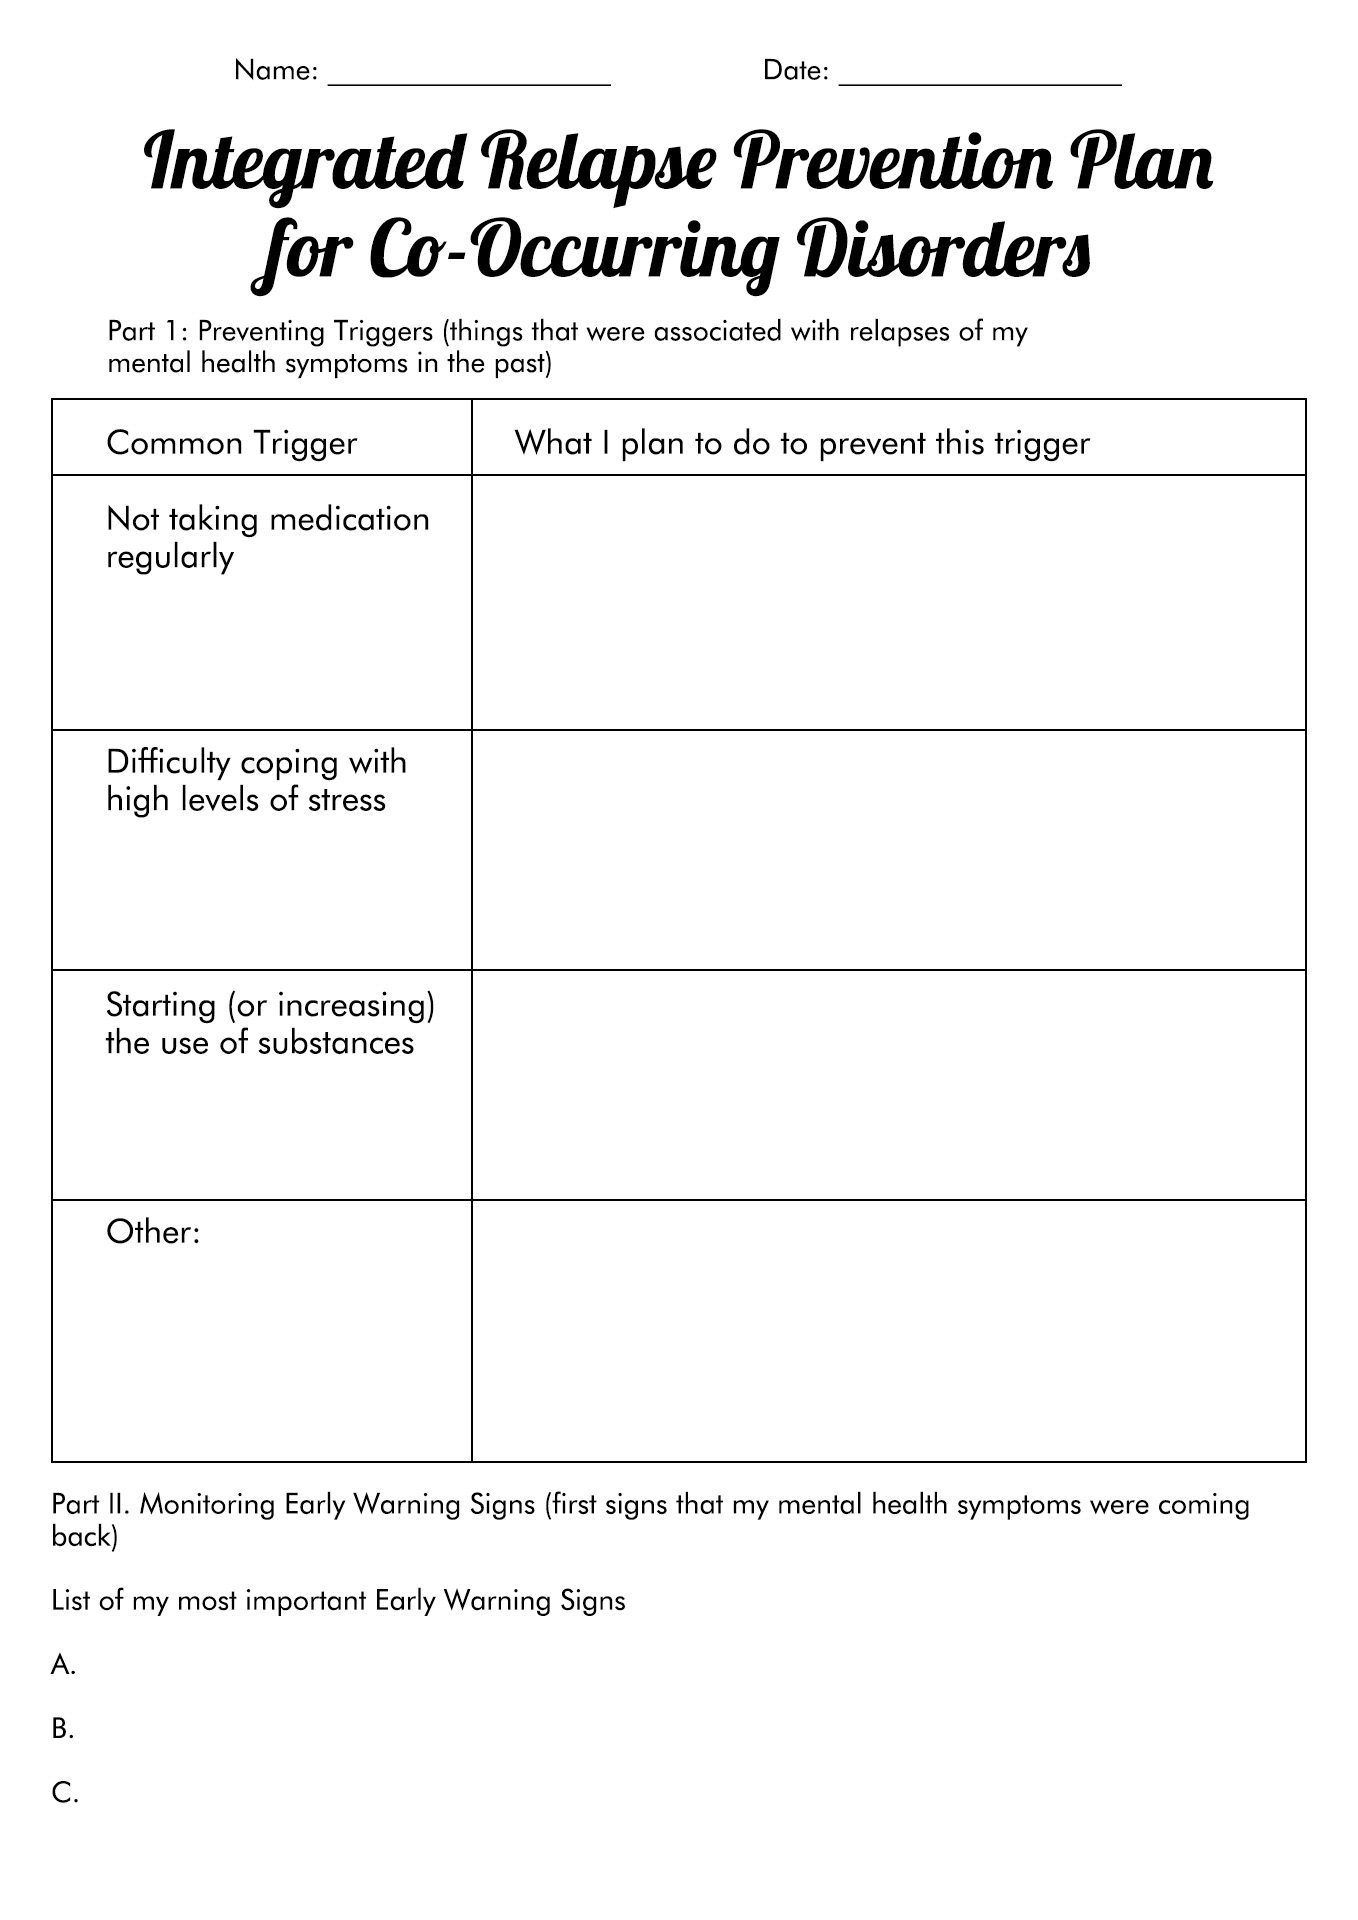 Relapse Prevention Plan Template Image